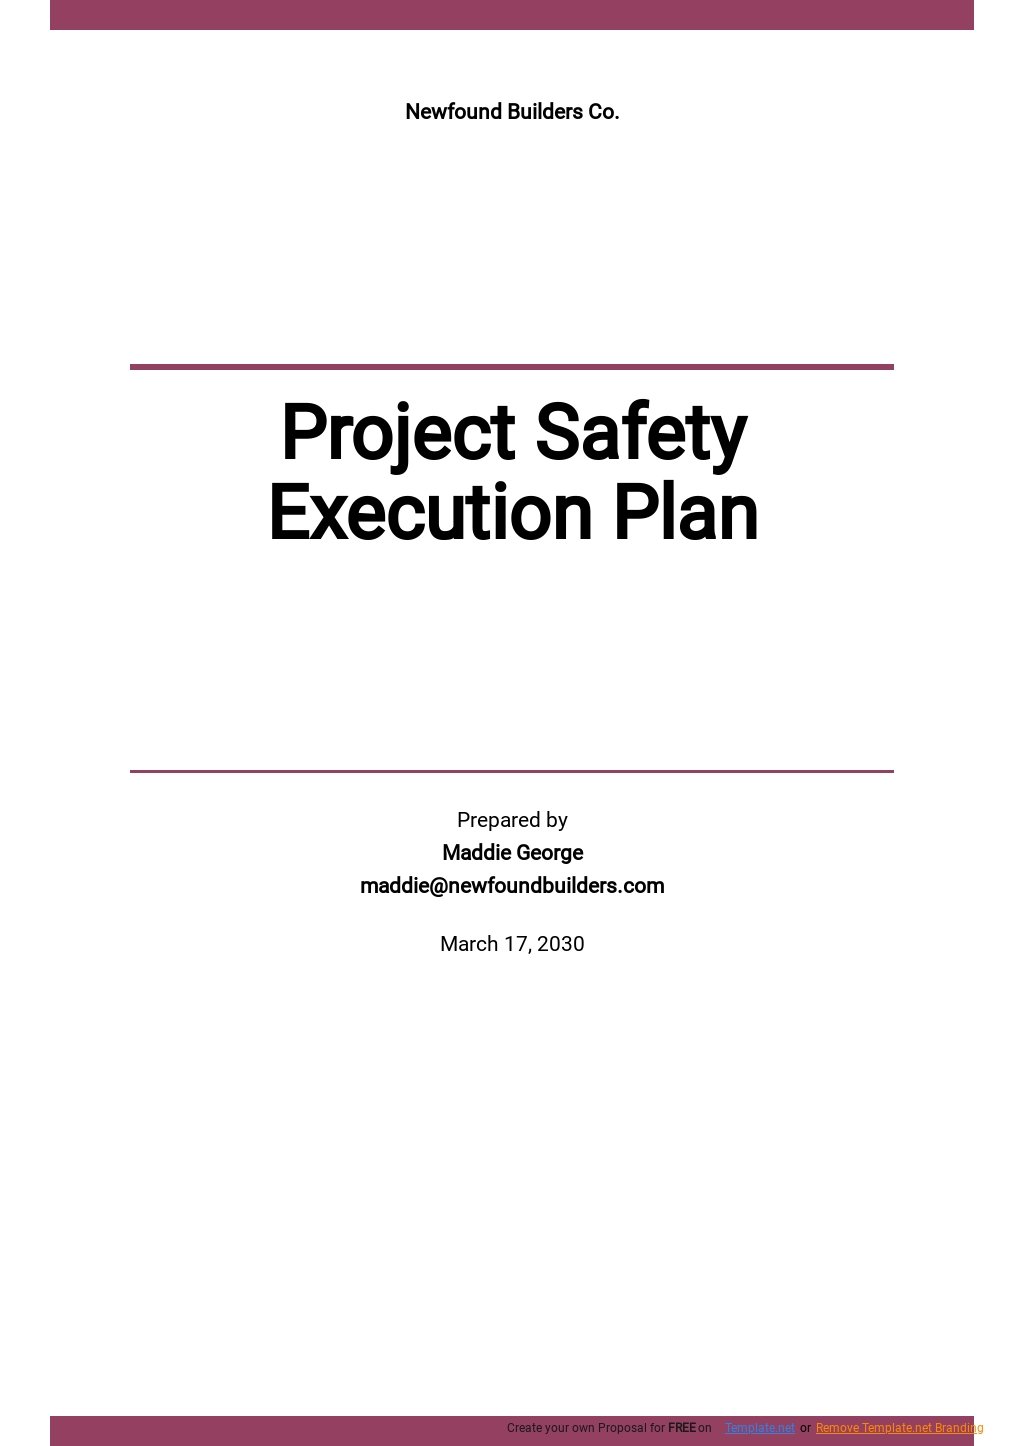 Execution Plan Template Word